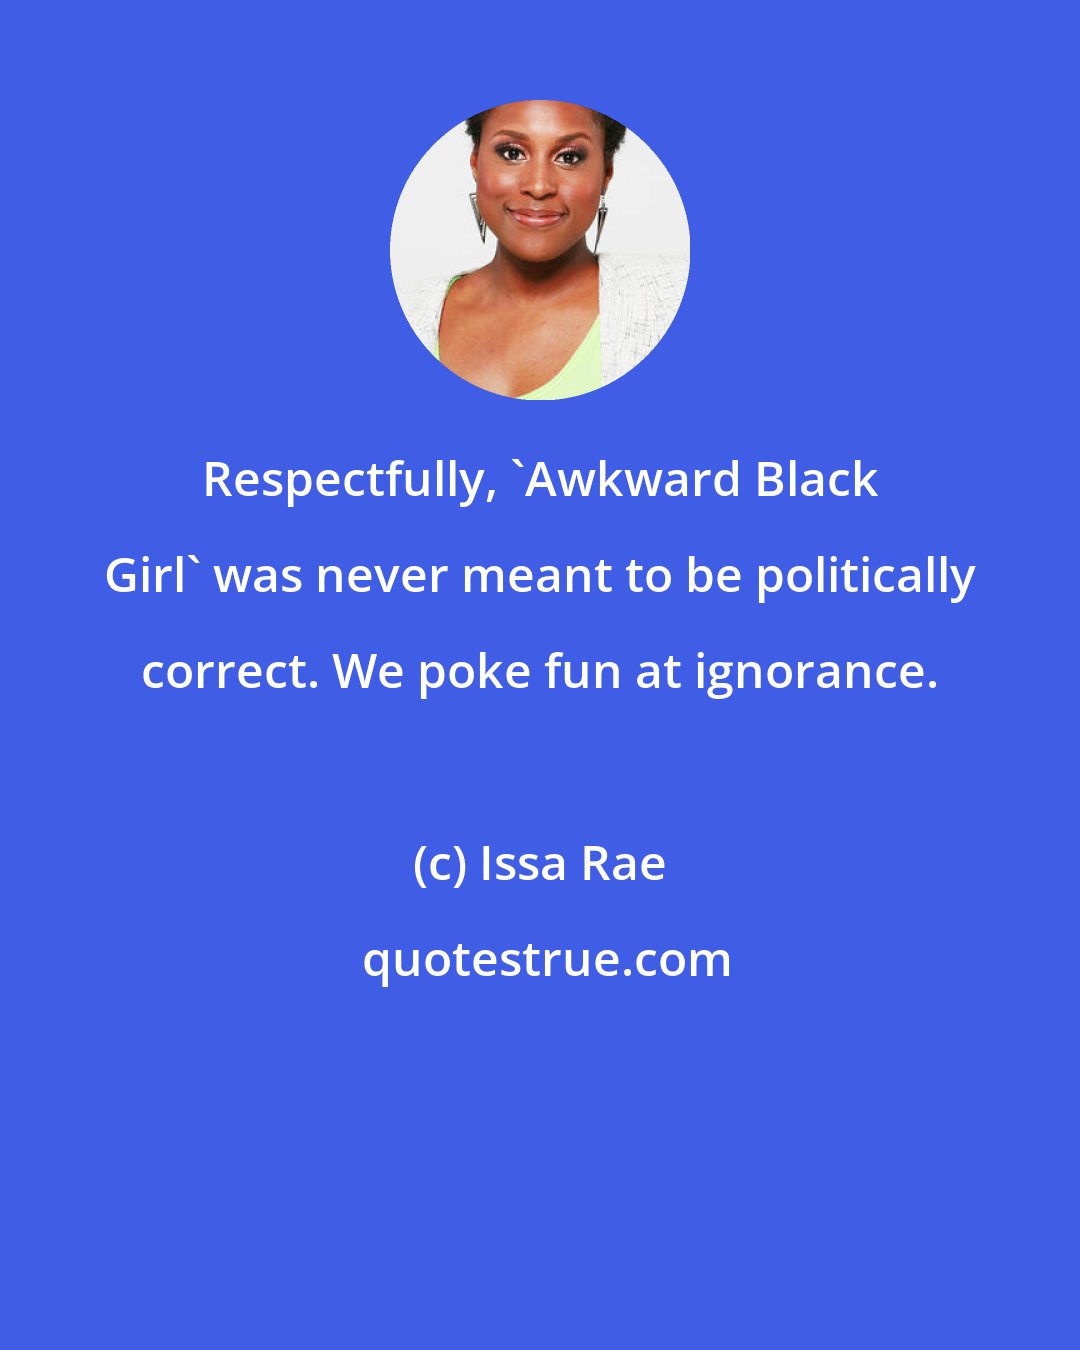 Issa Rae: Respectfully, 'Awkward Black Girl' was never meant to be politically correct. We poke fun at ignorance.